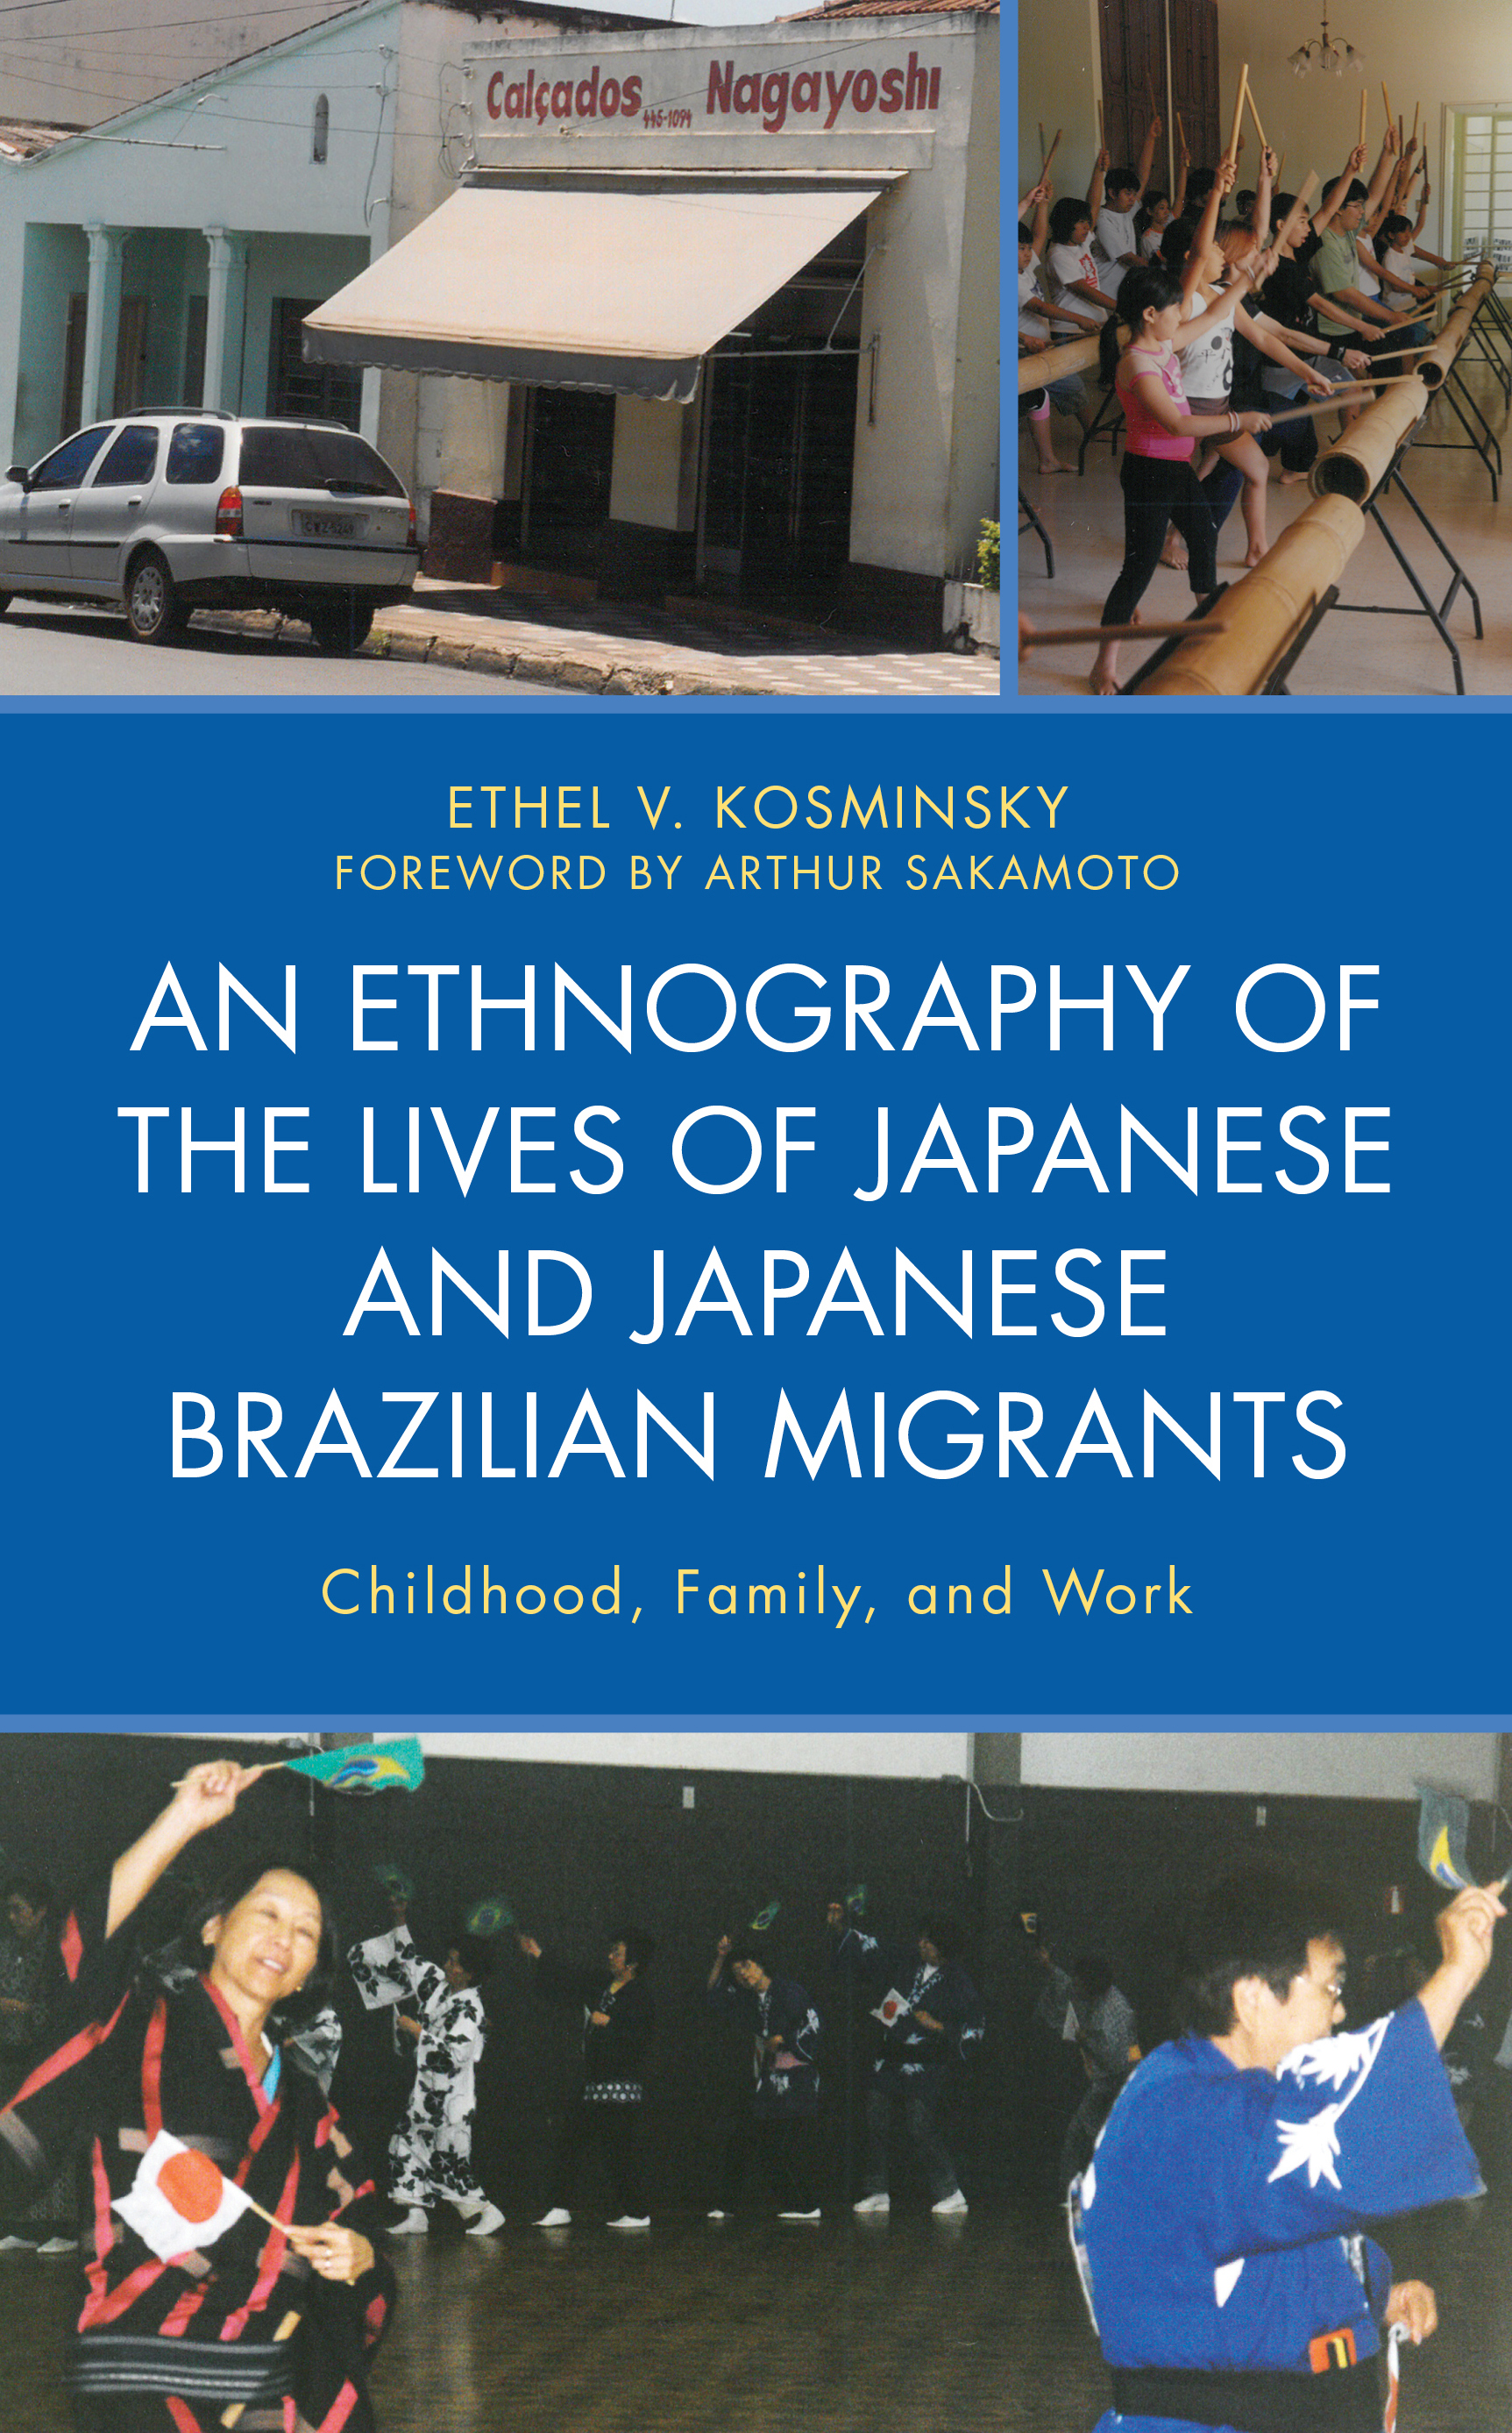 An Ethnography of the Lives of Japanese and Japanese Brazilian Migrants: Childhood, Family, and Work